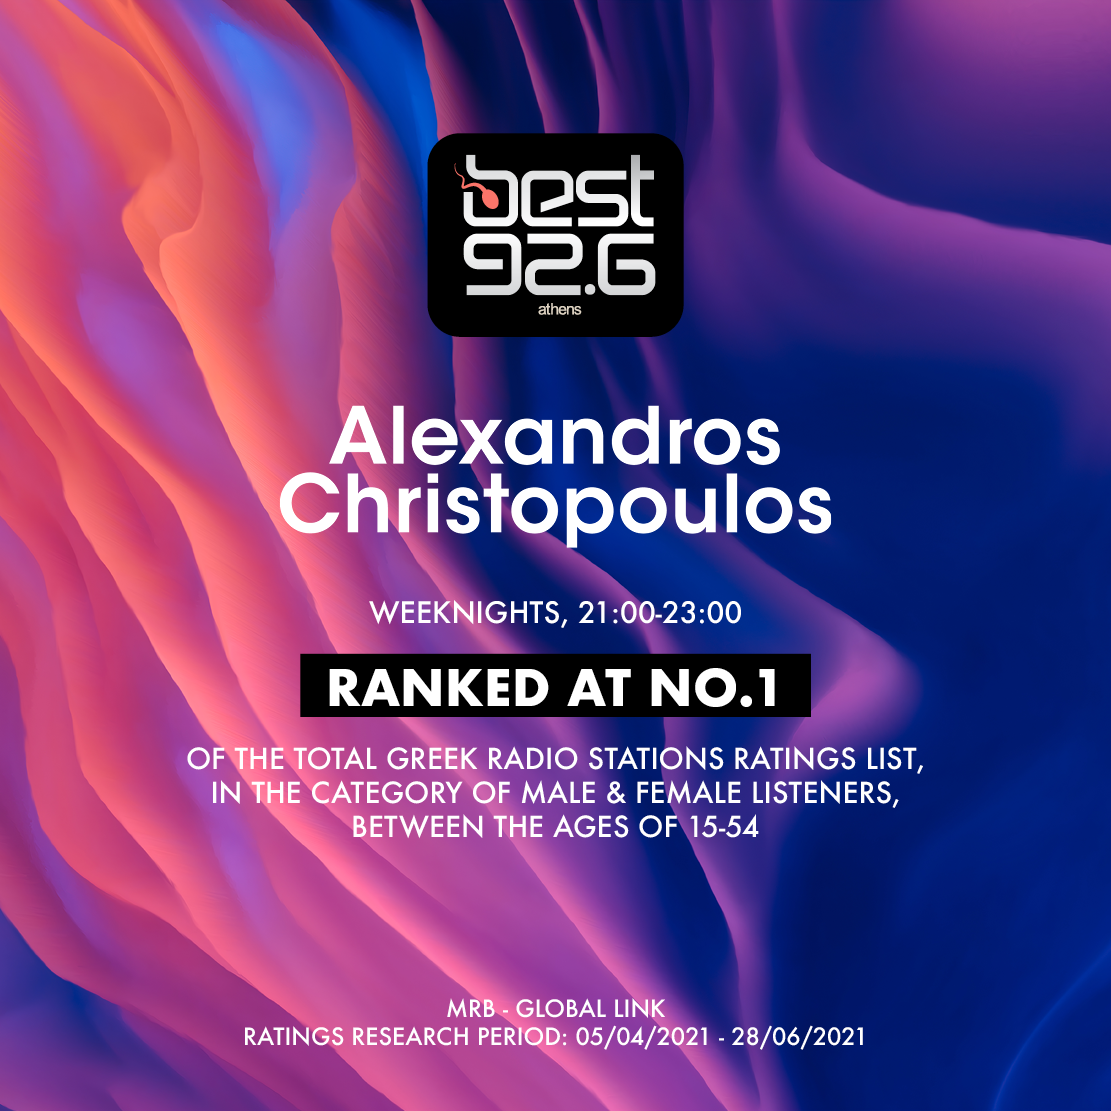 Best 92 6 Weeknights 9pm 11pm Alexandros Christopoulos Official Website